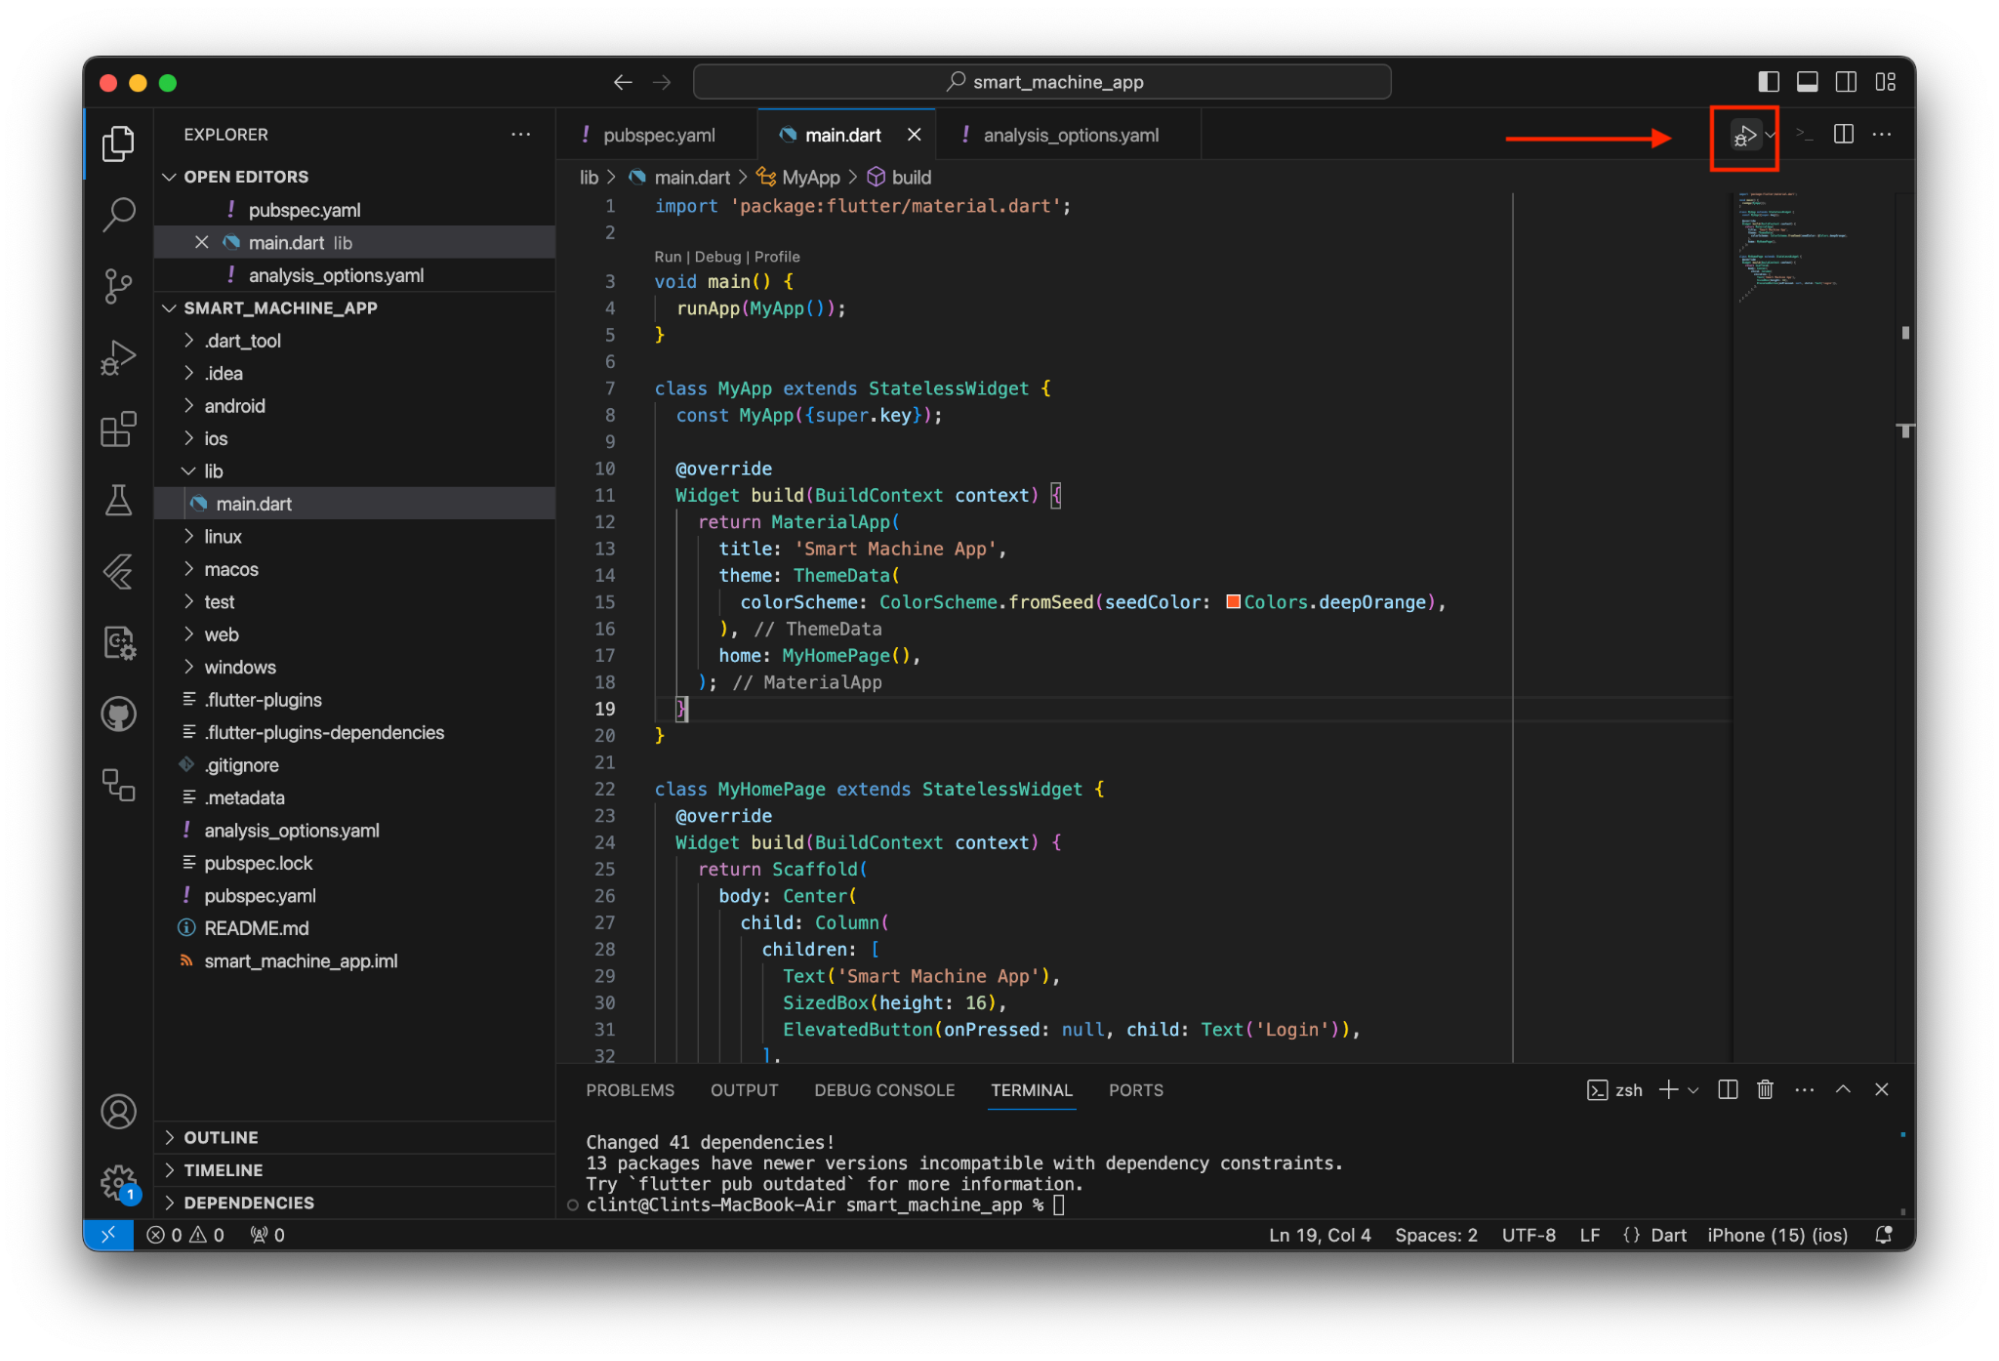 A VS Code window with main.dart open. In the top right corner, there is a button labeled 'Start Debugging' with an icon of a bug and a 'play' symbol.